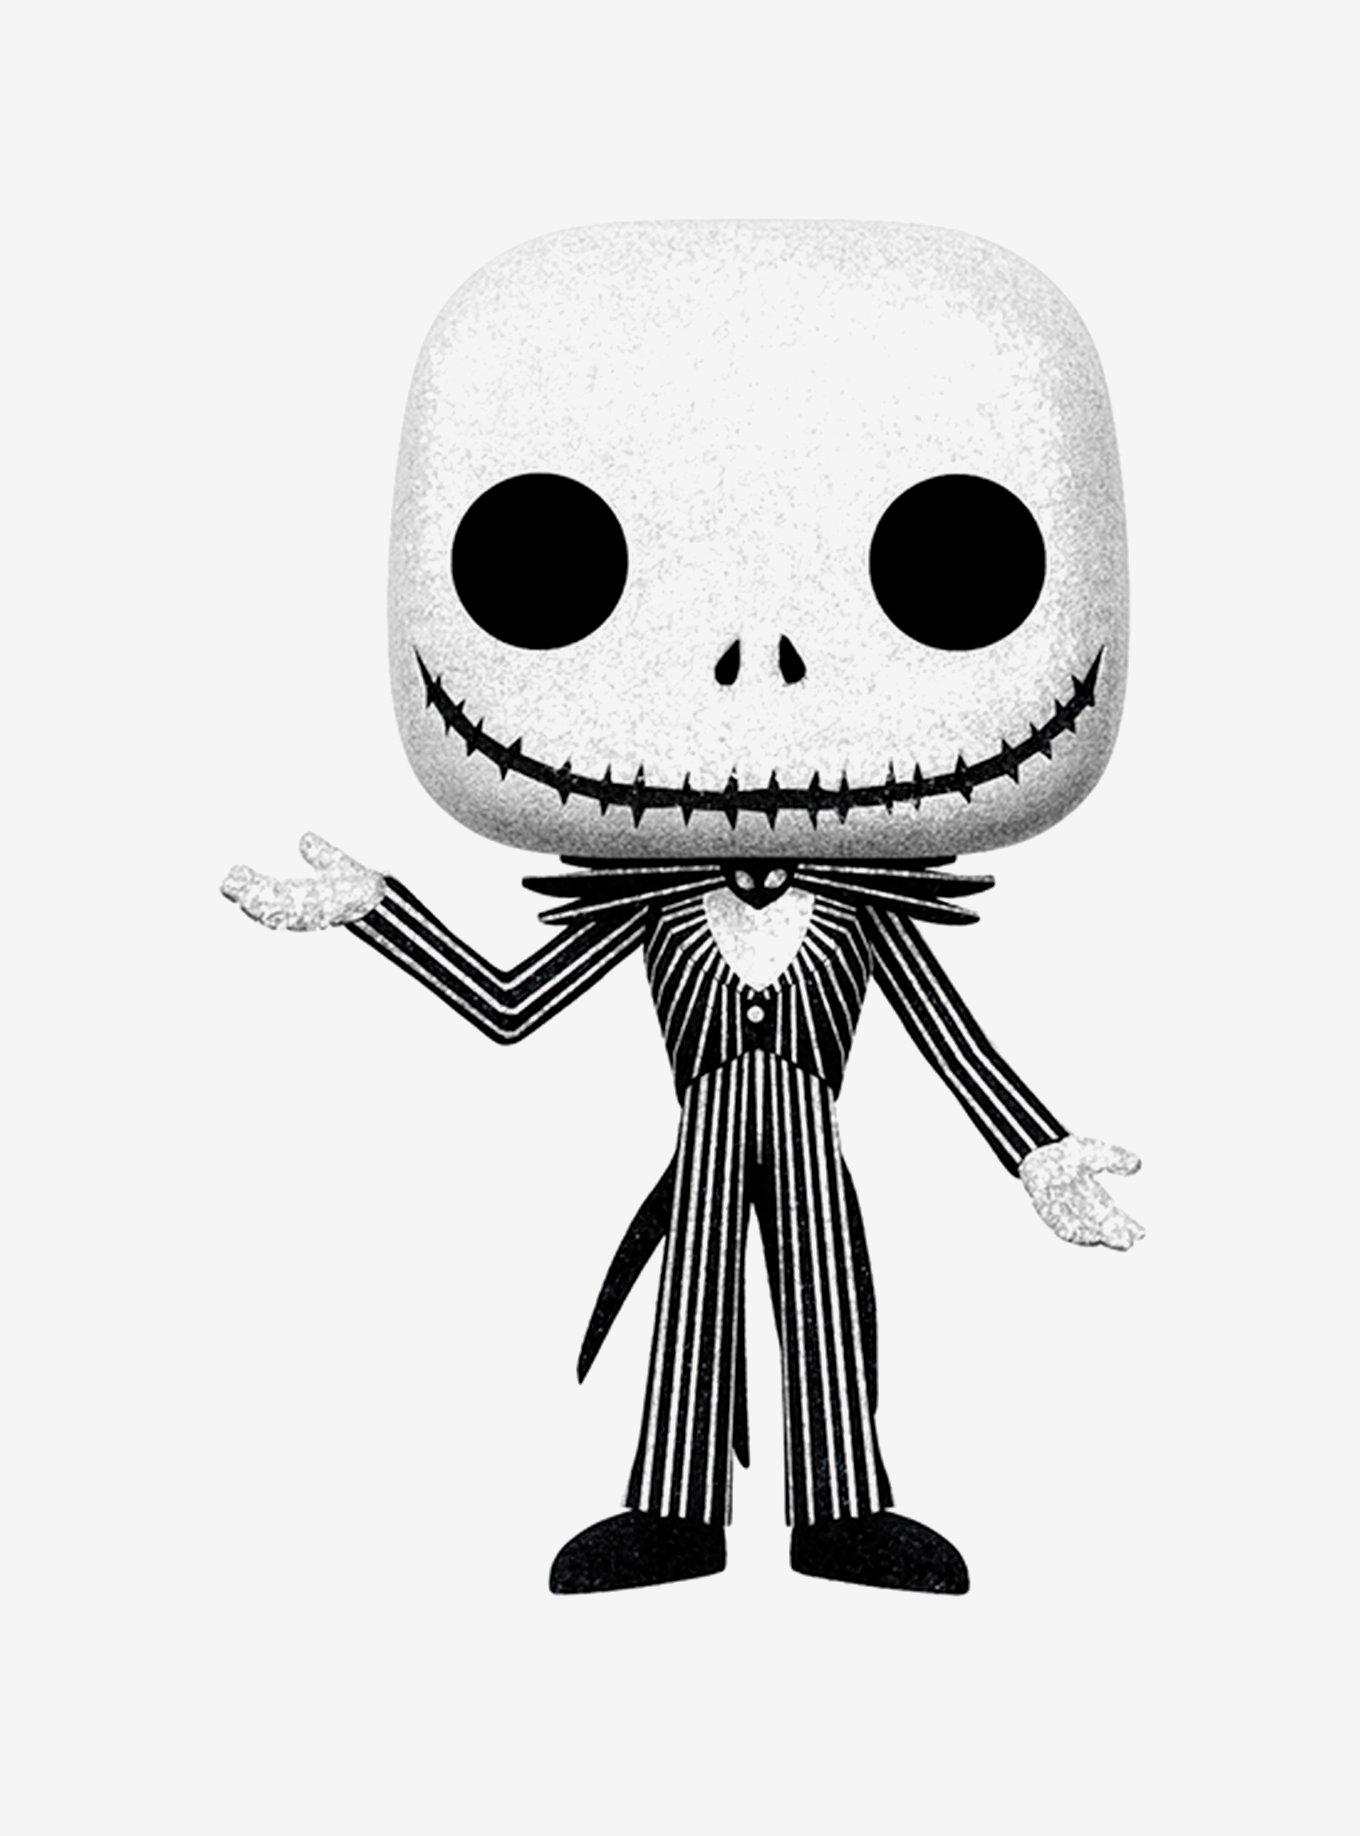 Funko Pop Hunters - Black pinstripe MJ coming exclusively to a US